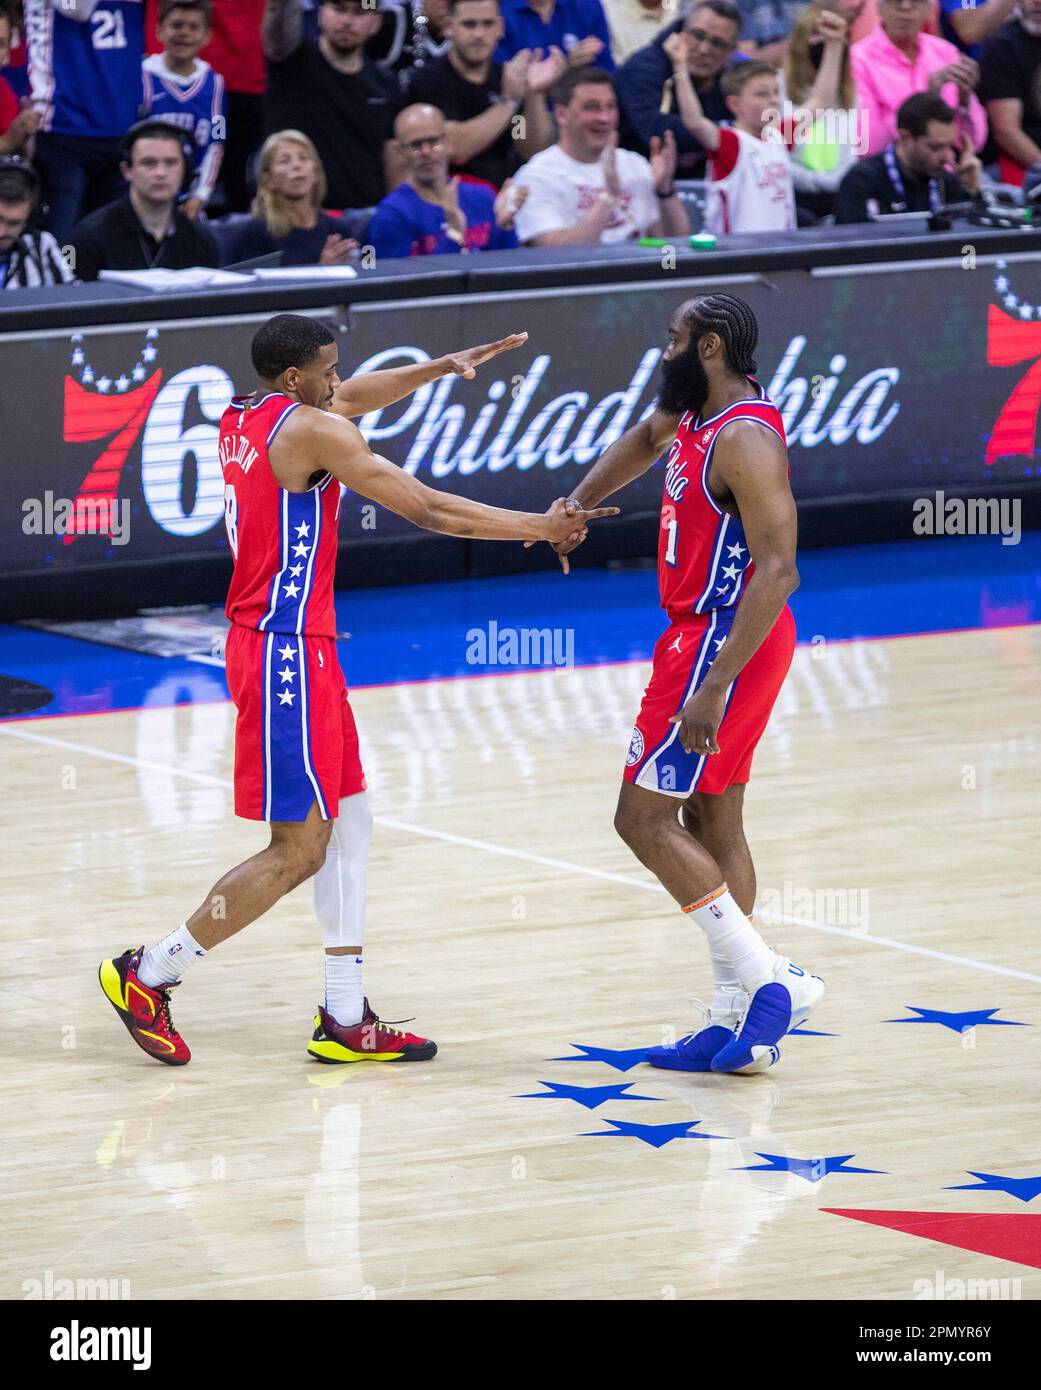 NBA playoffs: De'Anthony Melton emerging as playoff contributor for 76ers